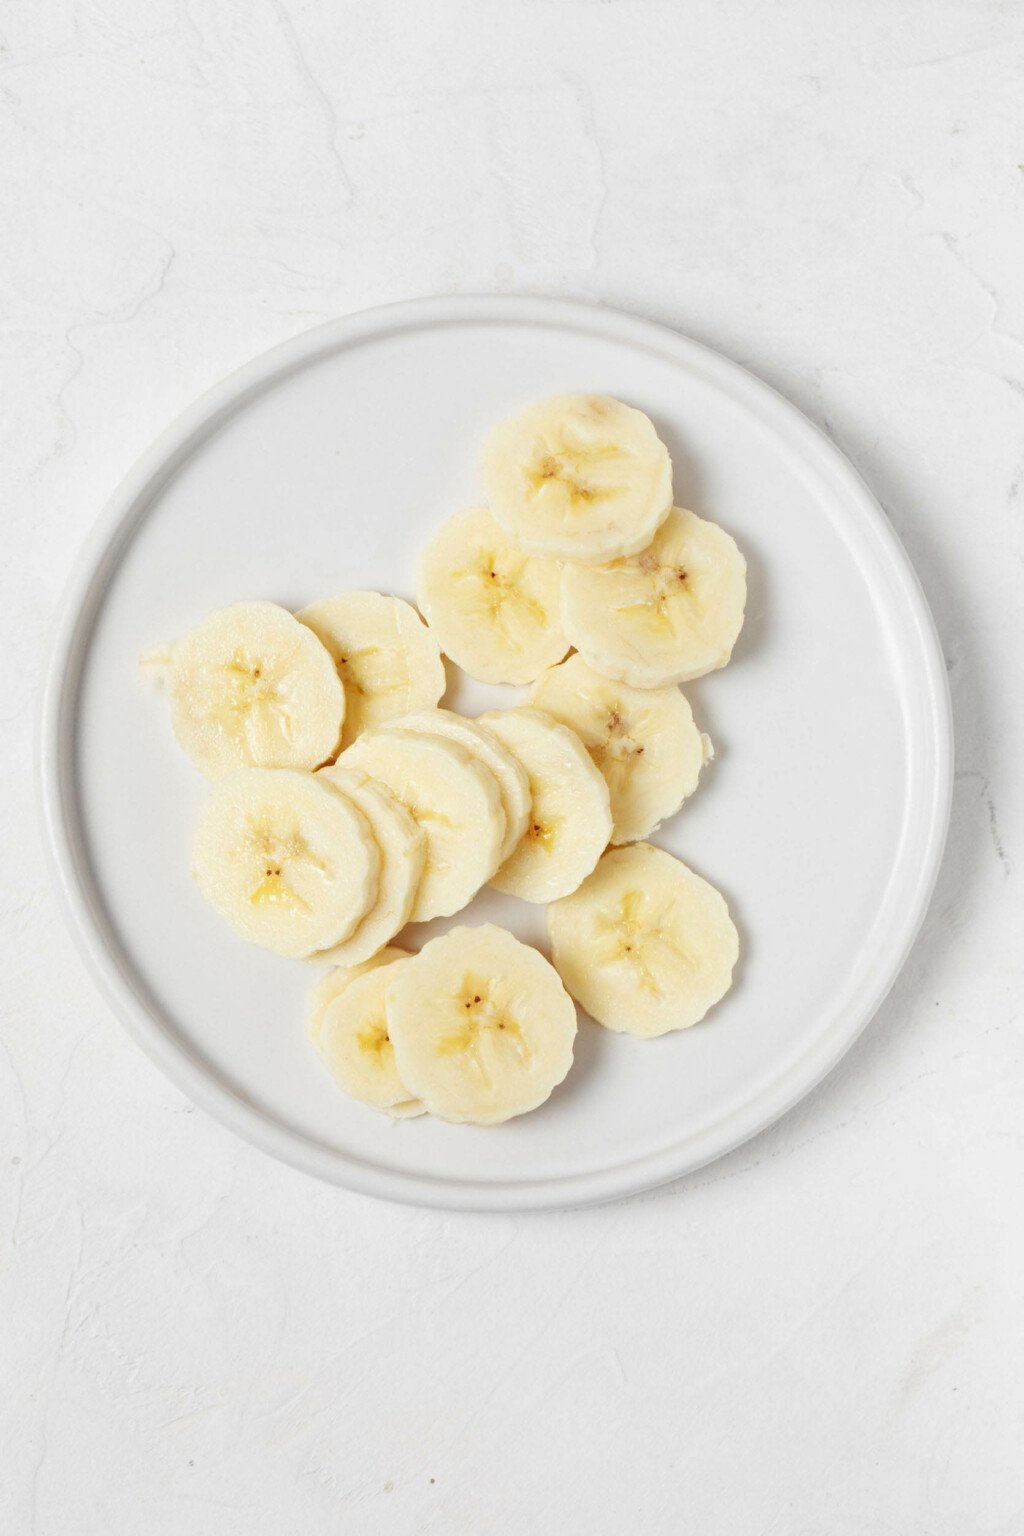 An overhead image of a small, round white plate, topped with banana slices.